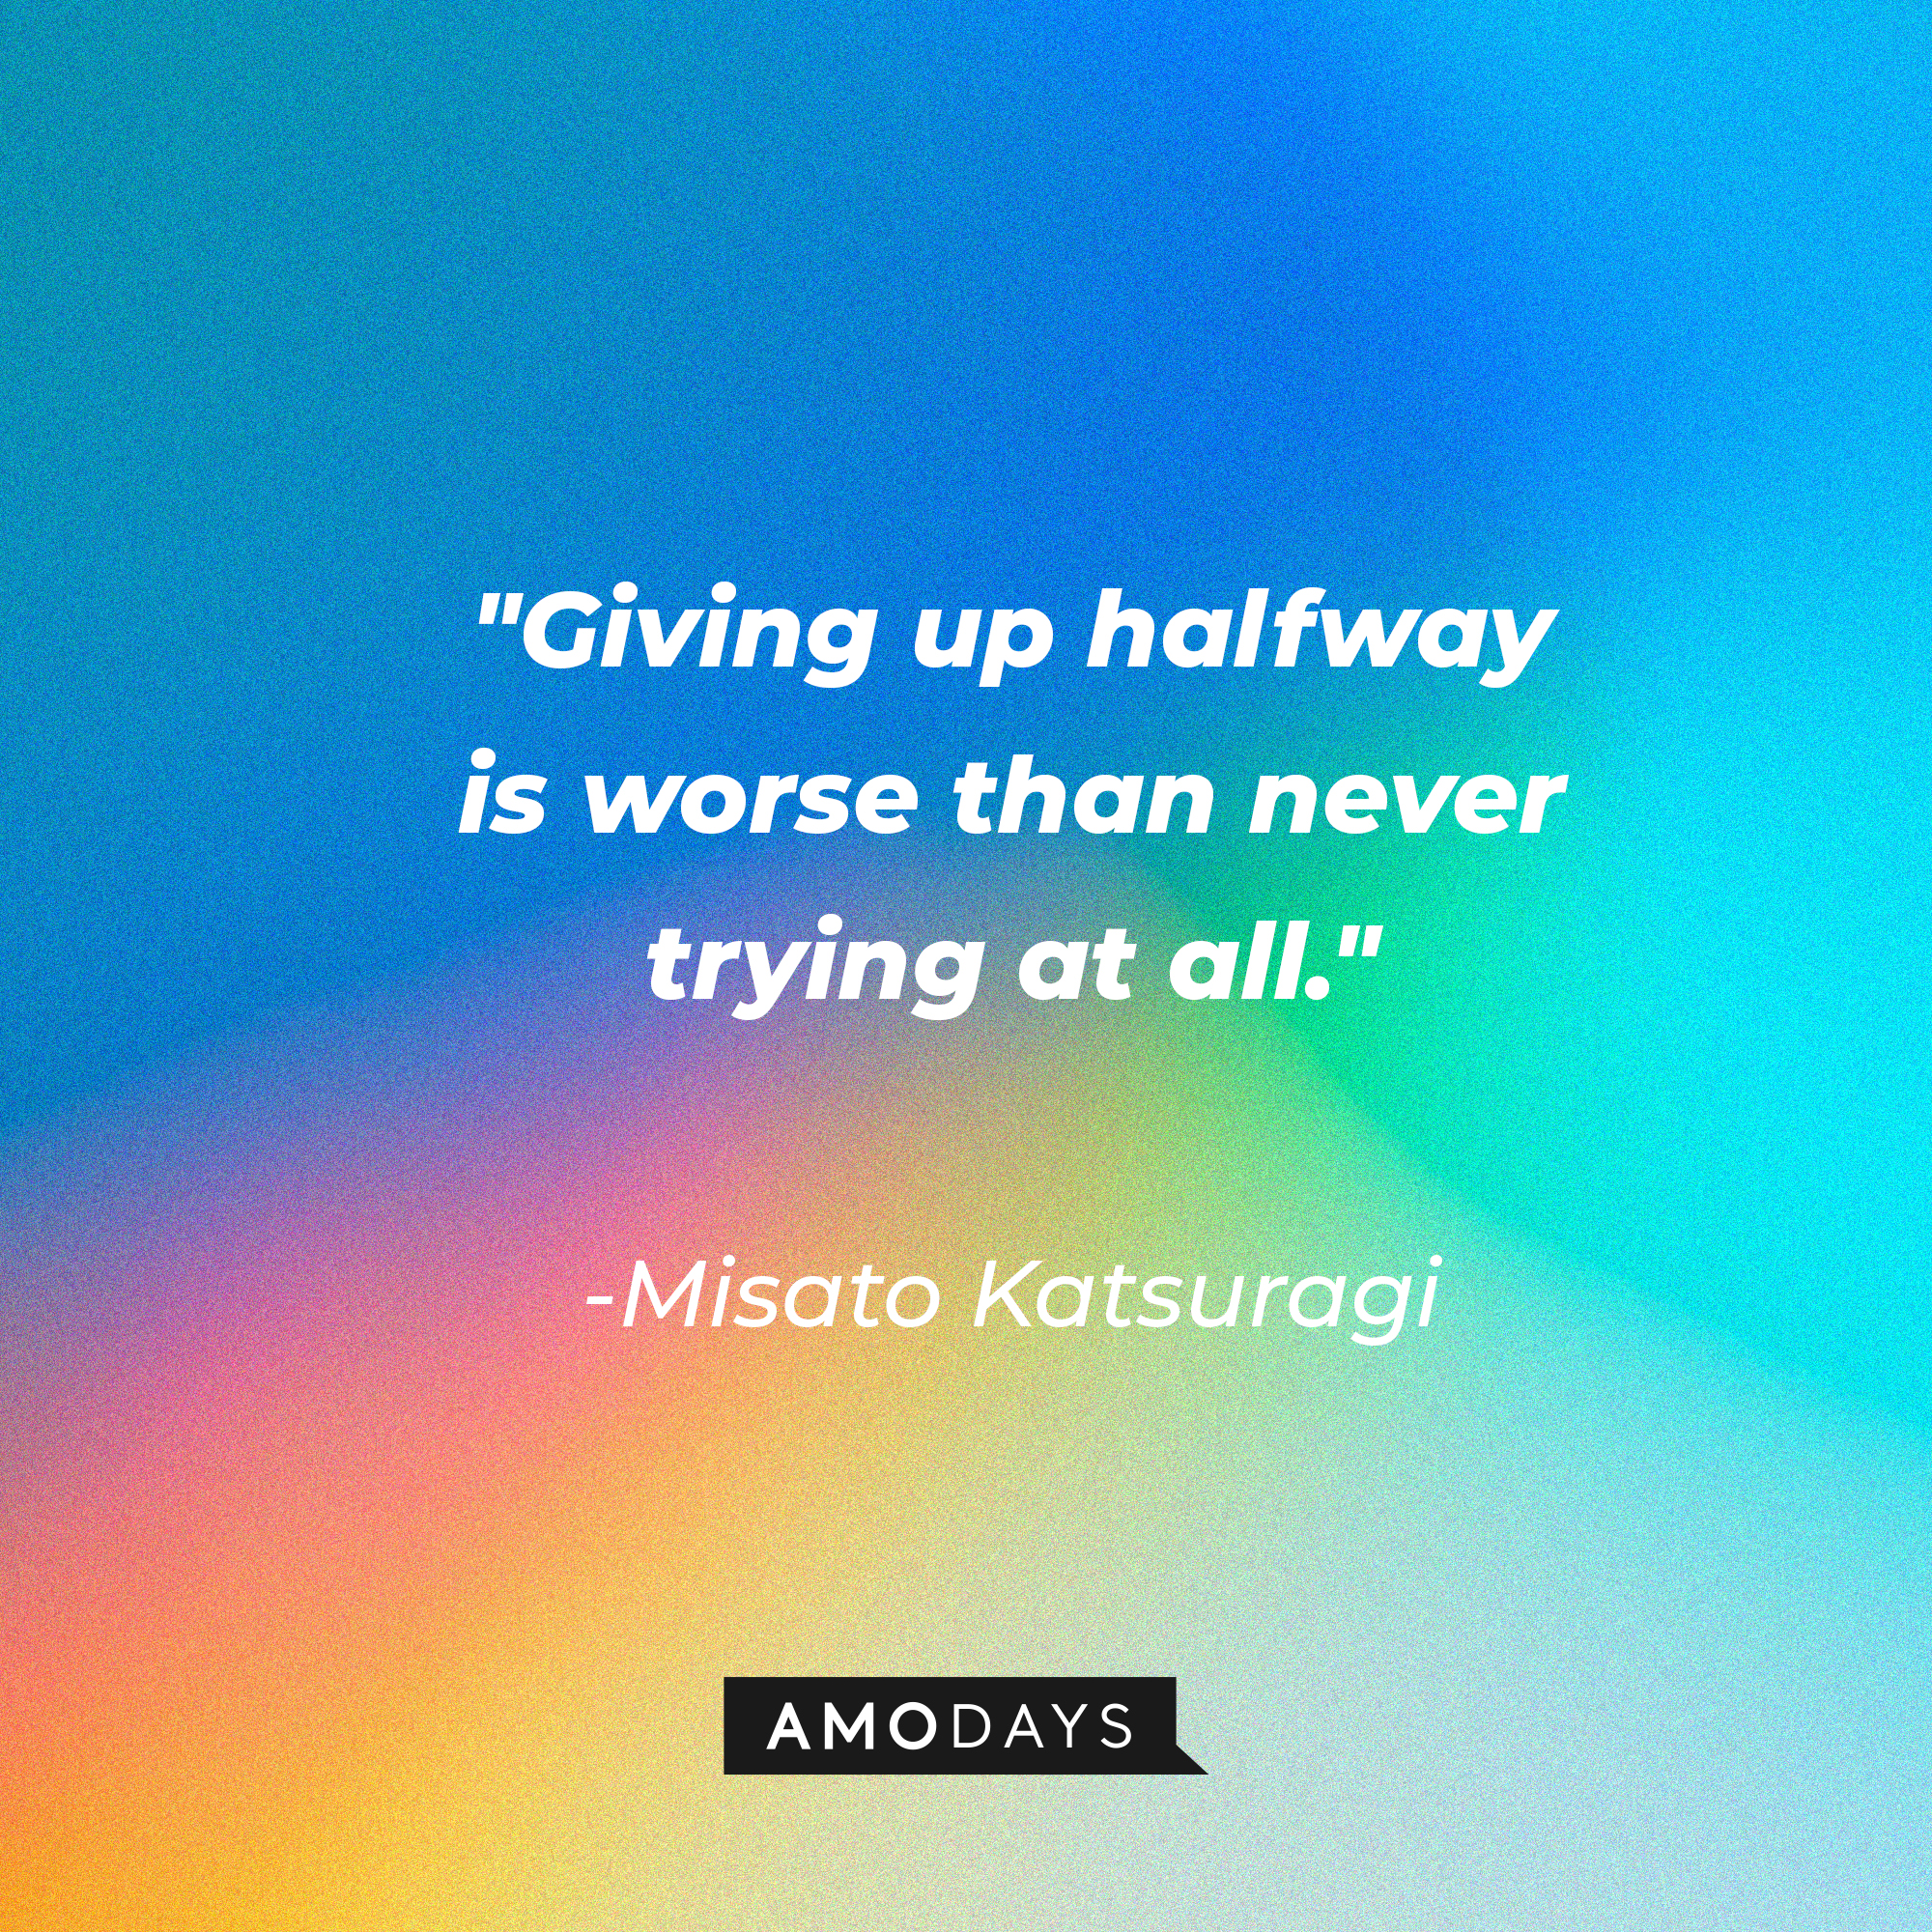 Misato Katsuragi’s quote: "Giving up halfway is worse than never trying at all." | Source: AmoDays